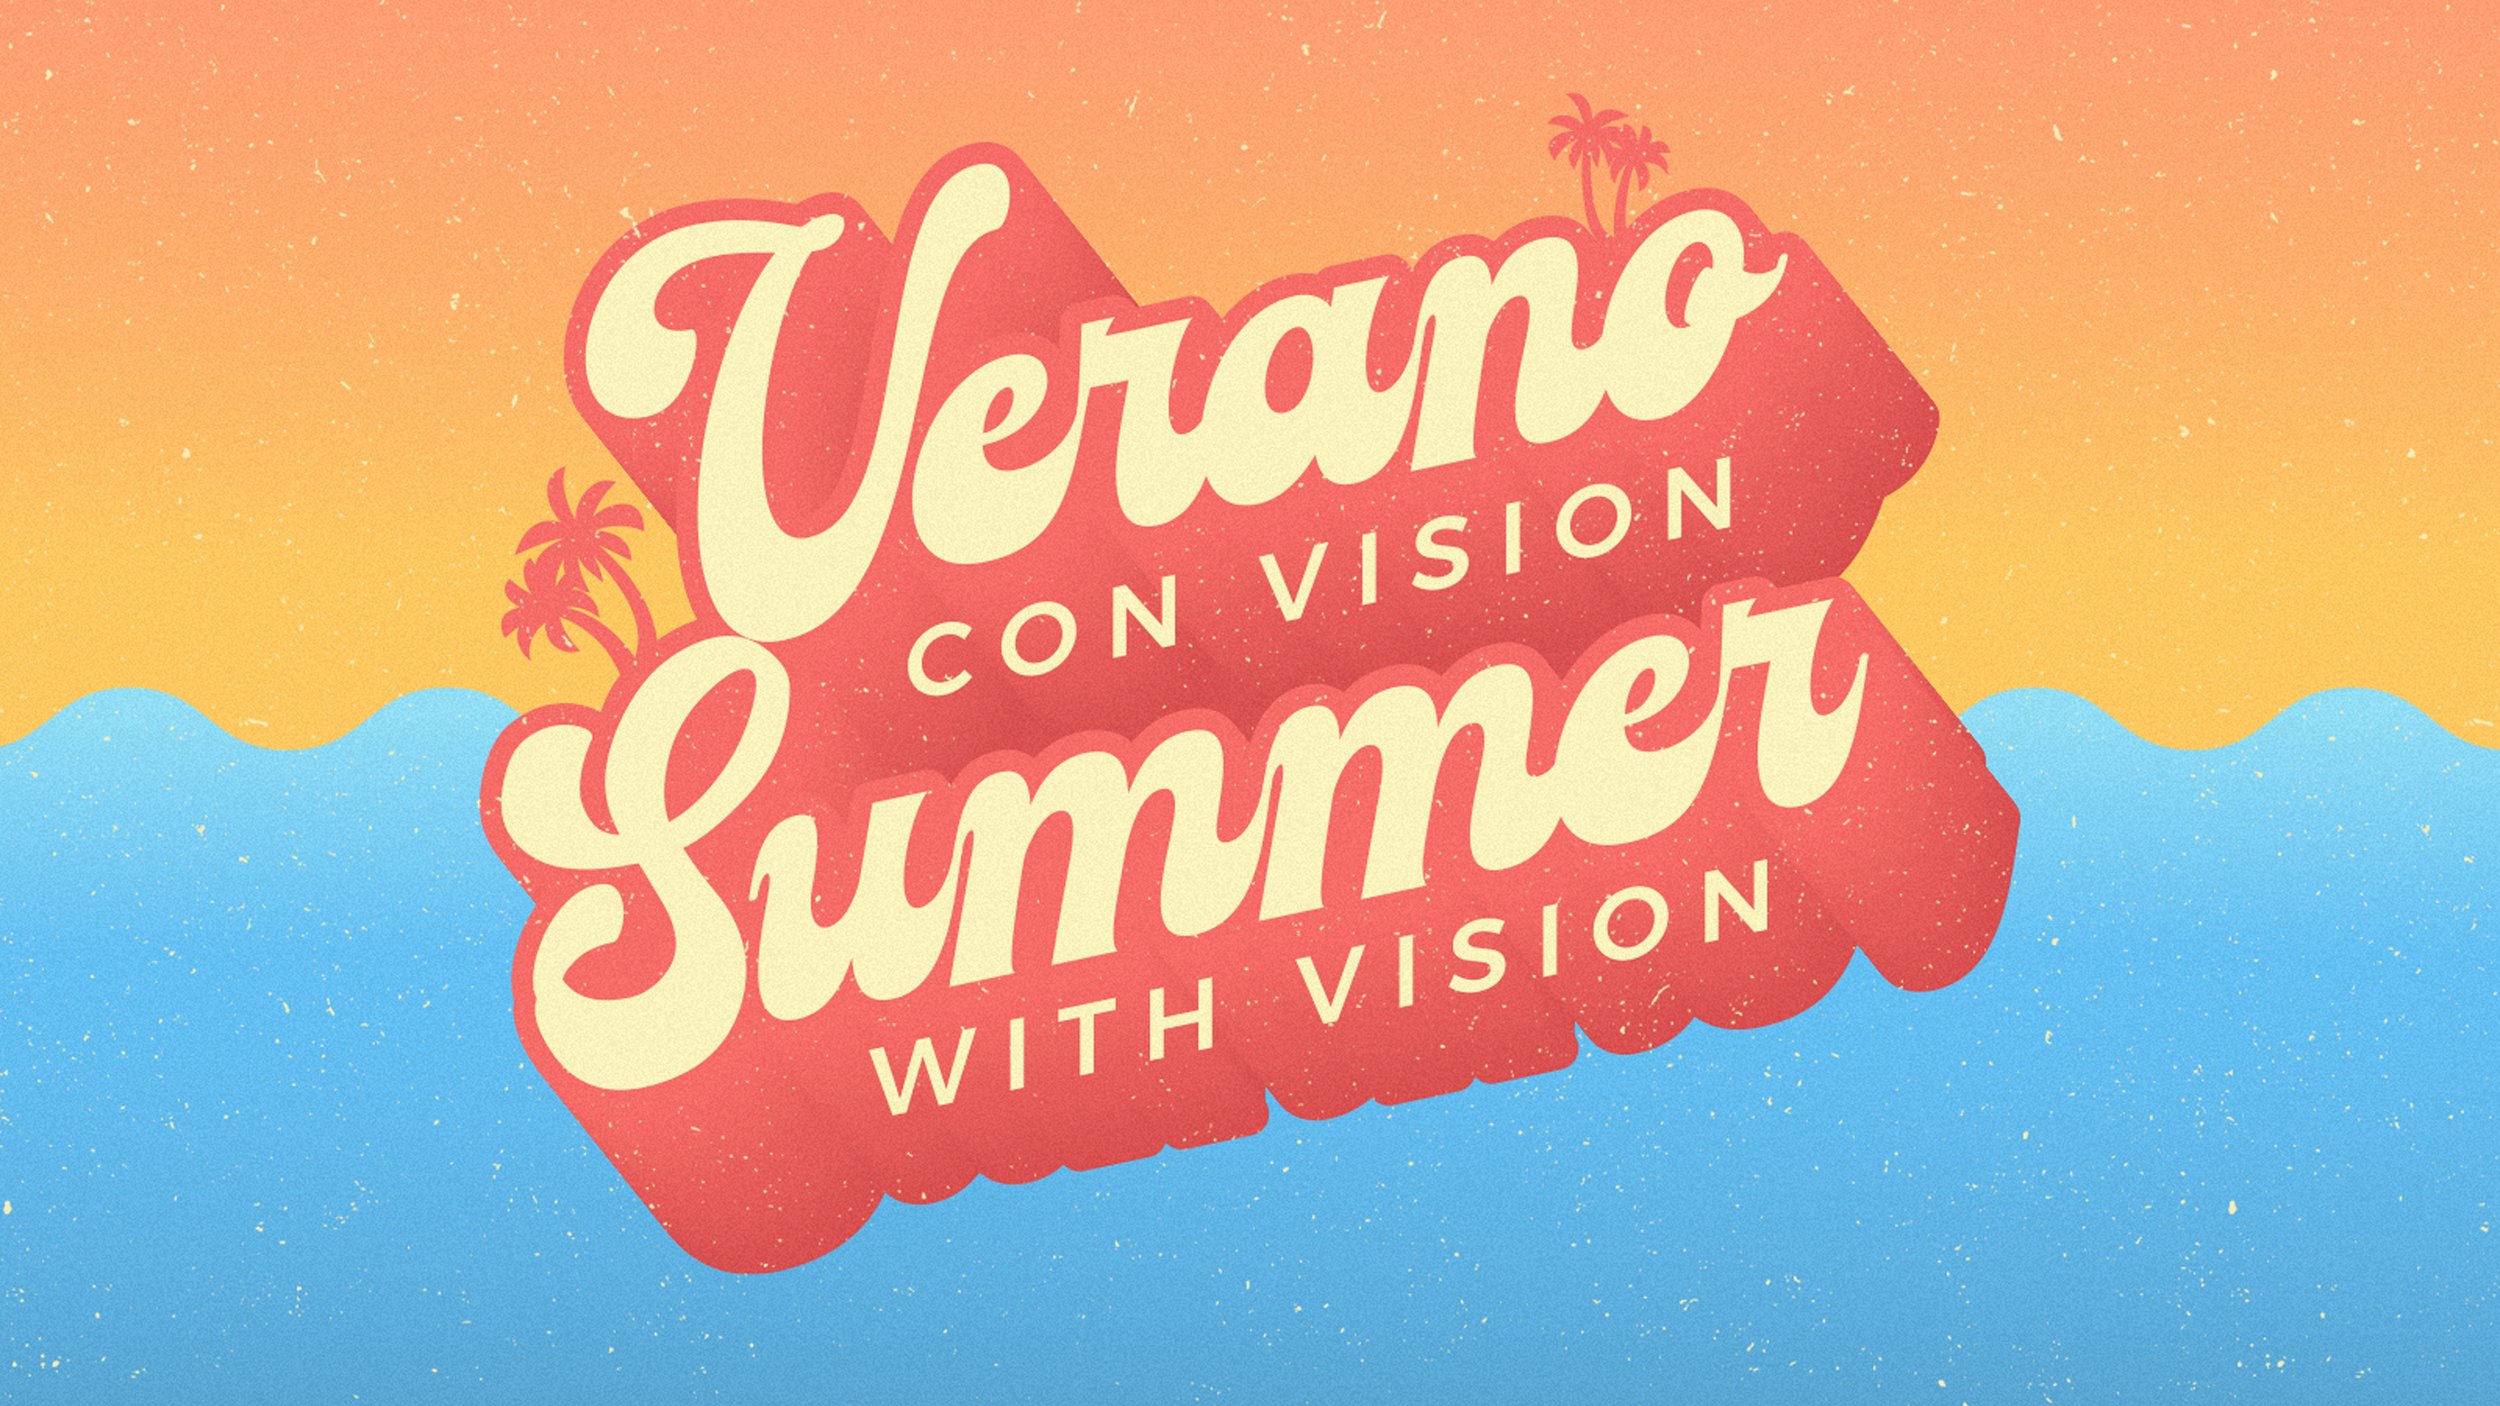 VC-Summer-With-Vision-16x9-Bilingual.jpg